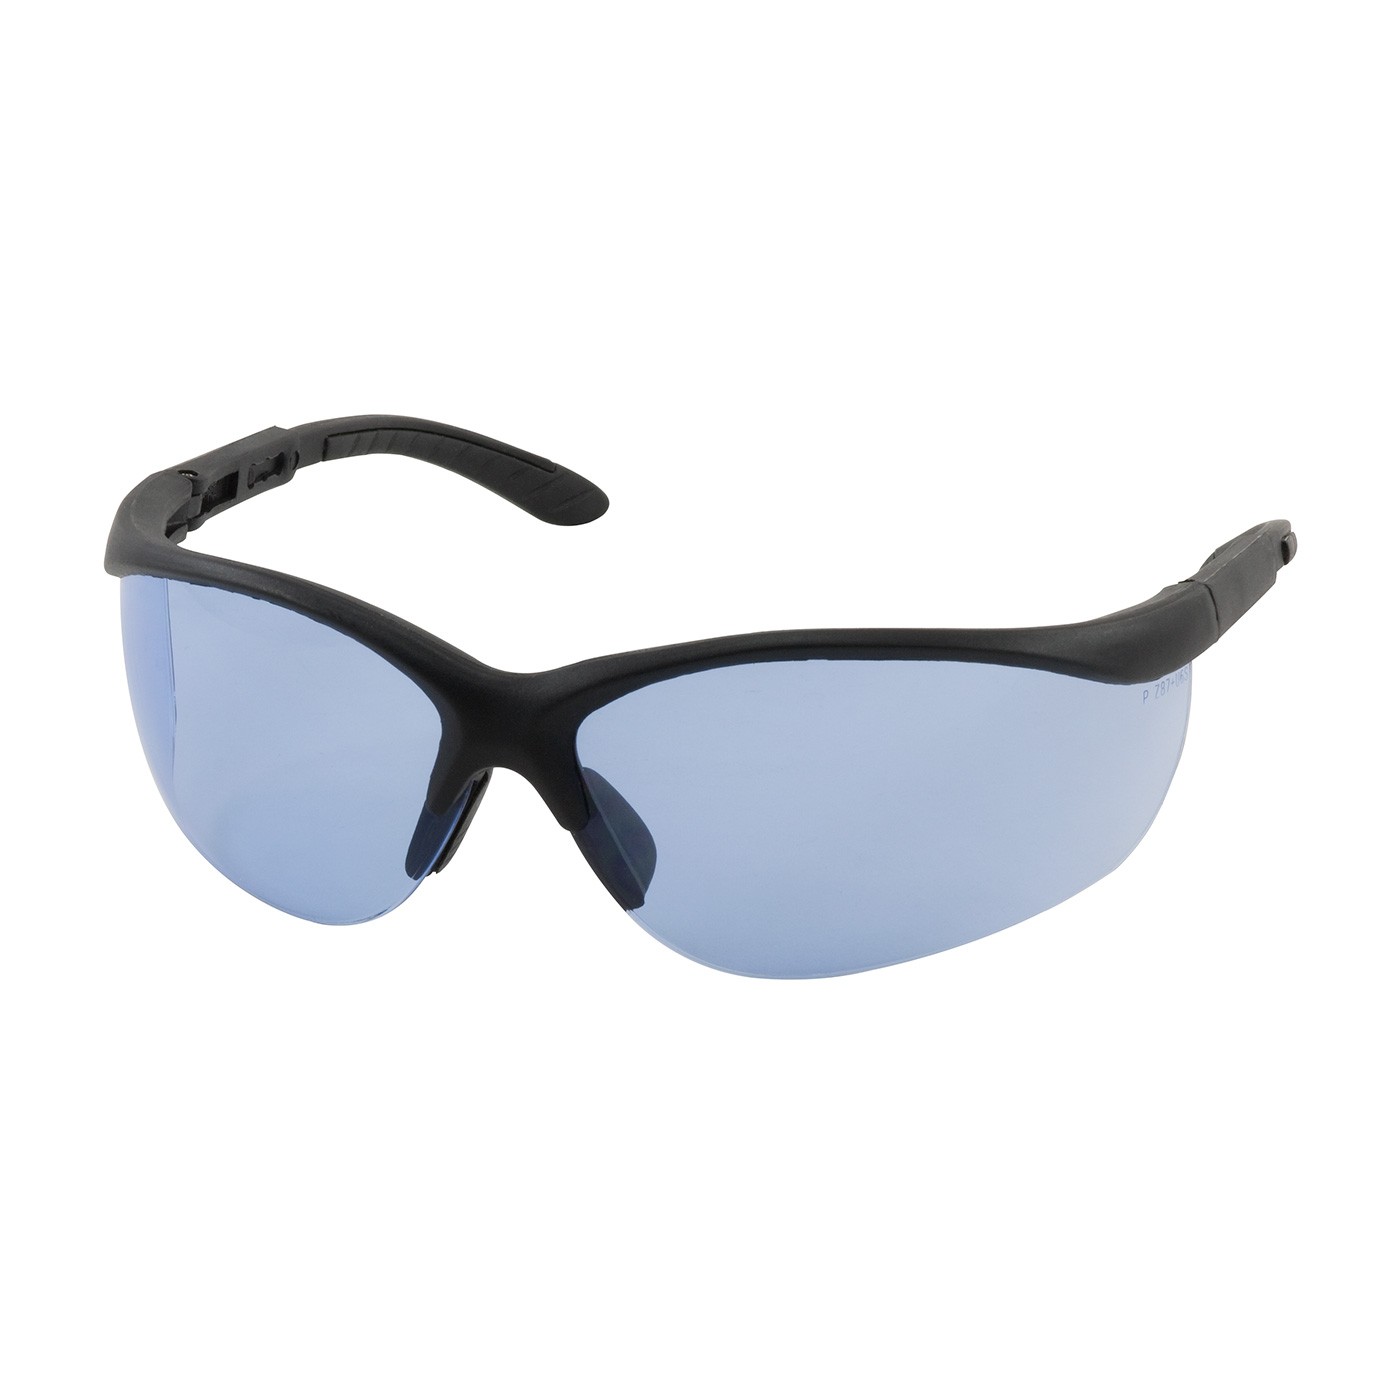 Hi-Voltage AC™ Semi-Rimless Safety Glasses with Black Frame, Light Blue Lens and Anti-Scratch Coating  (#250-21-0403)